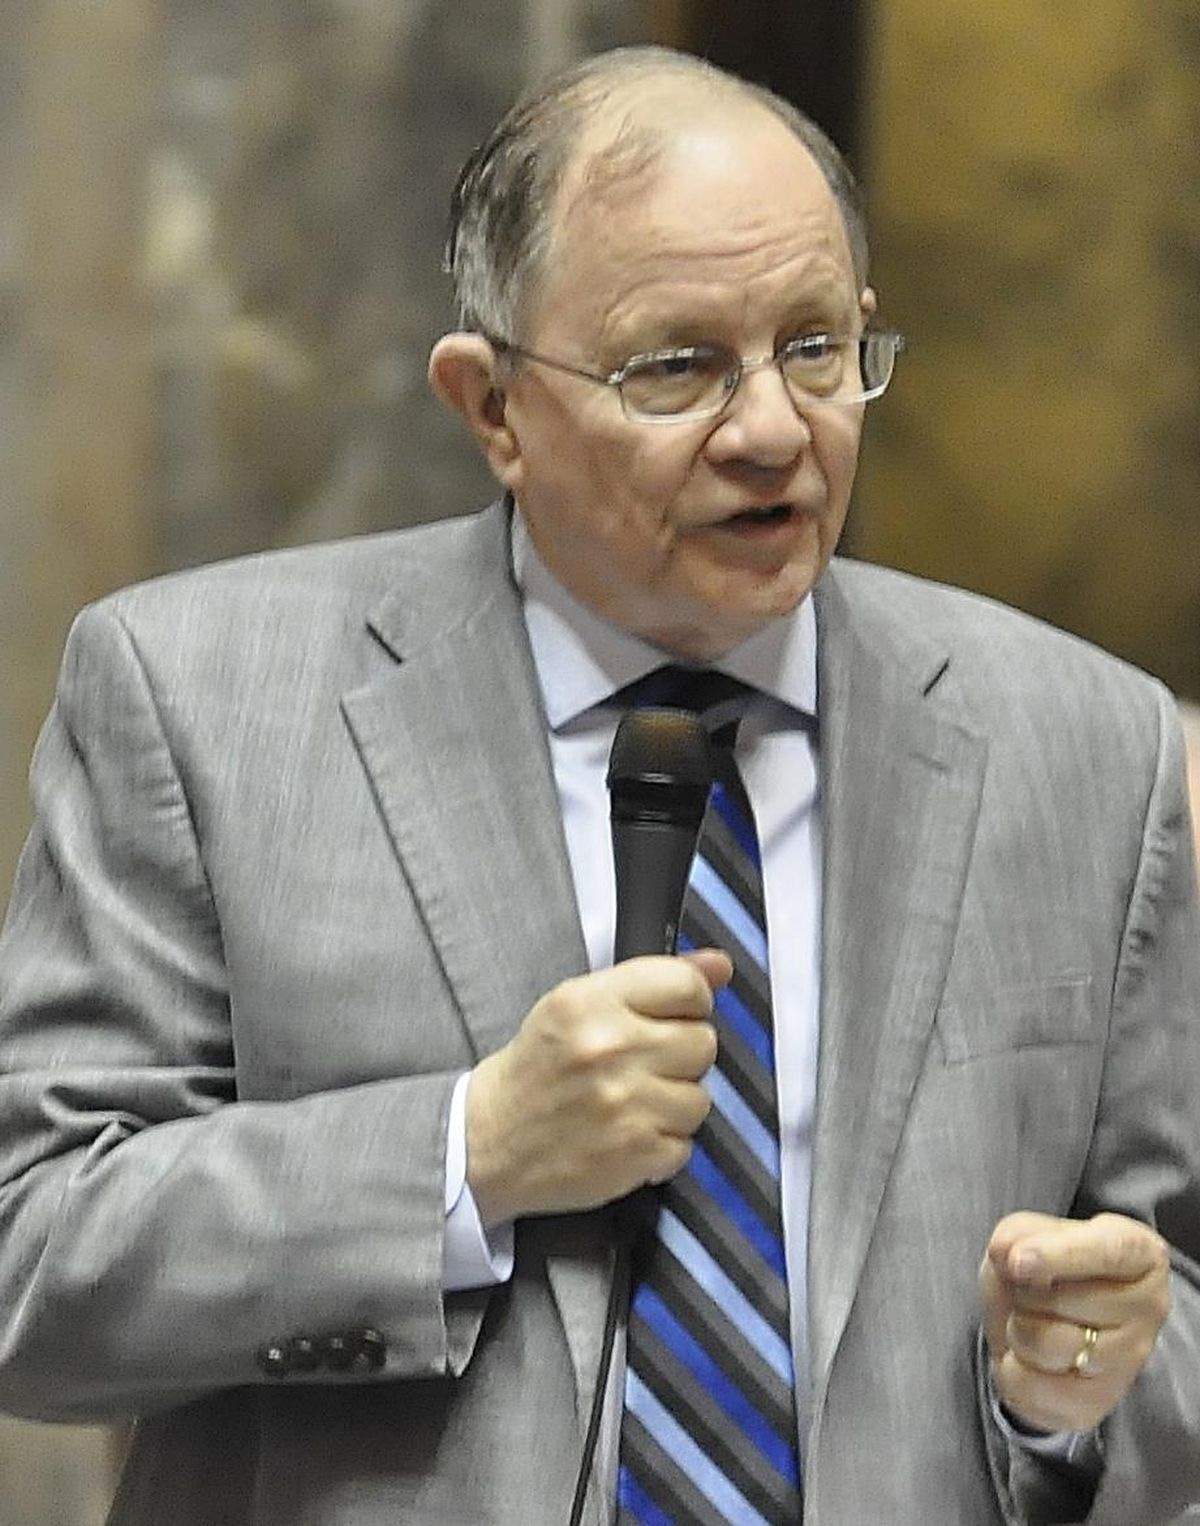 Sen. Mike Padden is sparring with Attorney General Bob Ferguson over how cities and counties should respond to federal requests for help with immigration enforcement. (File photo / File photo)